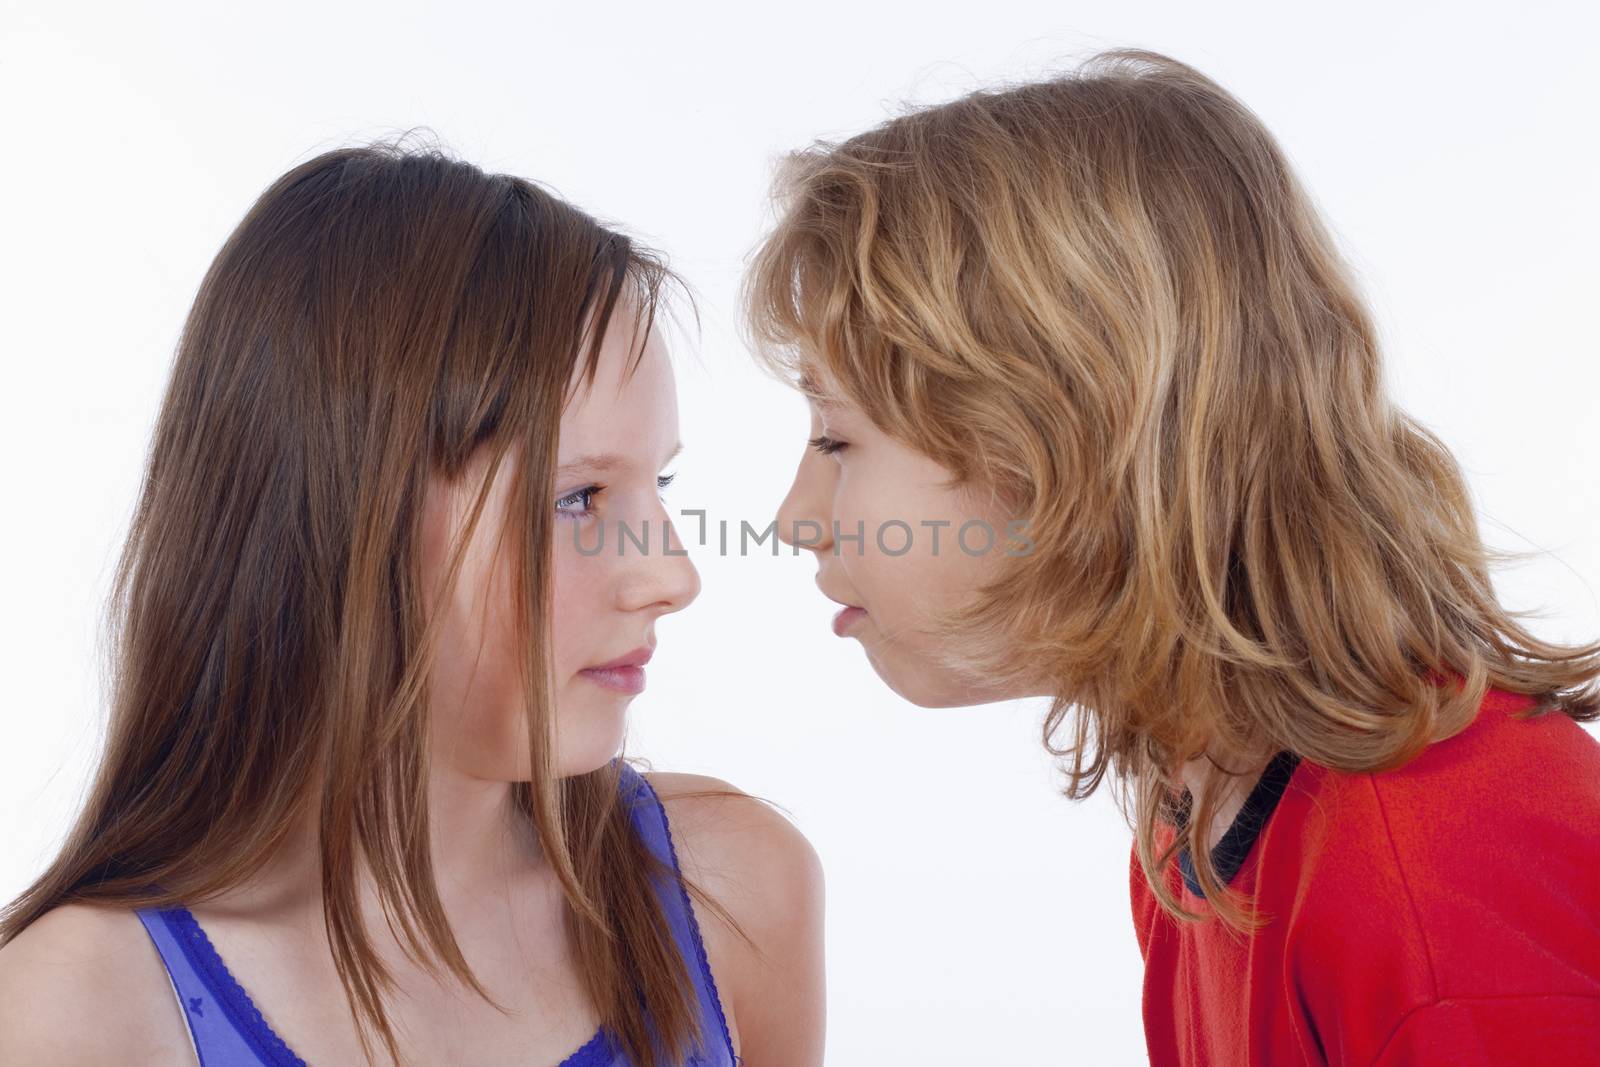 young boy and girl standing close talking - isolated on white